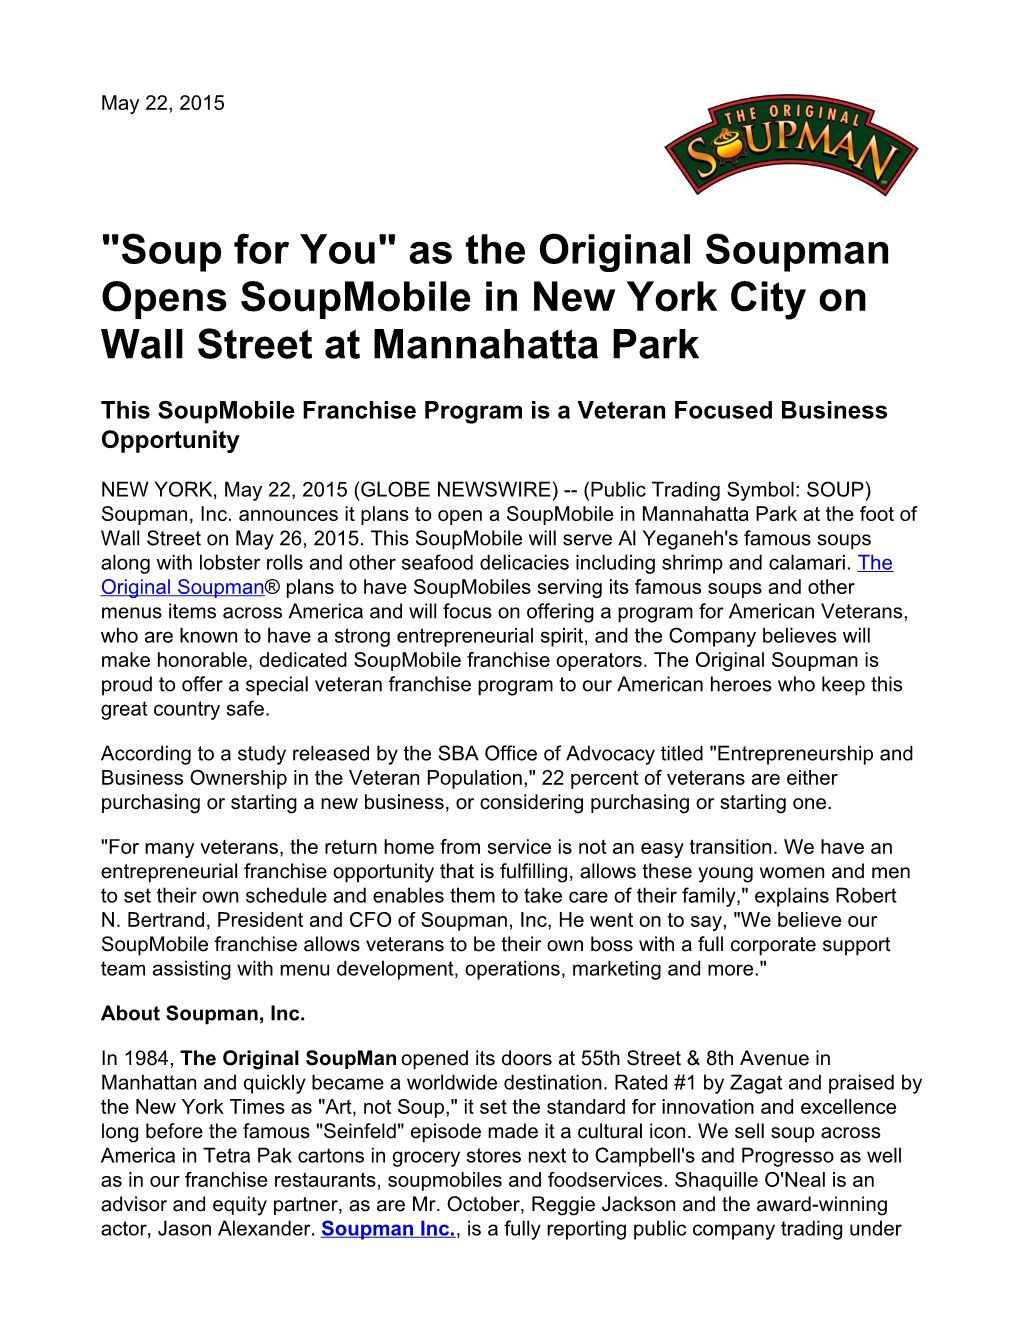 "Soup for You" As the Original Soupman Opens Soupmobile in New York City on Wall Street at Mannahatta Park